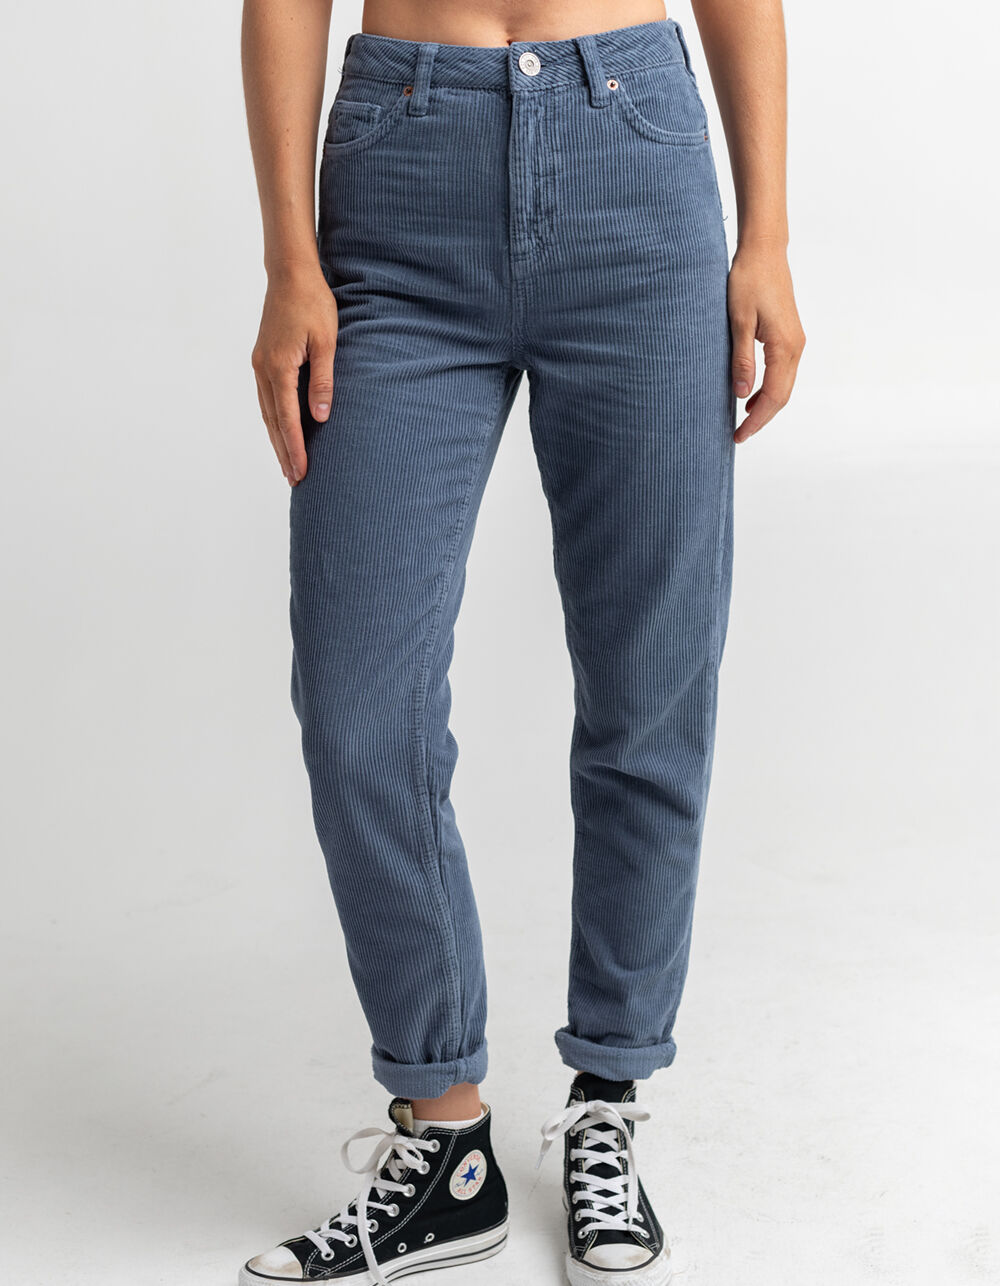 BDG Color Corduroy High-Waisted Mom Pant, Urban Outfitters